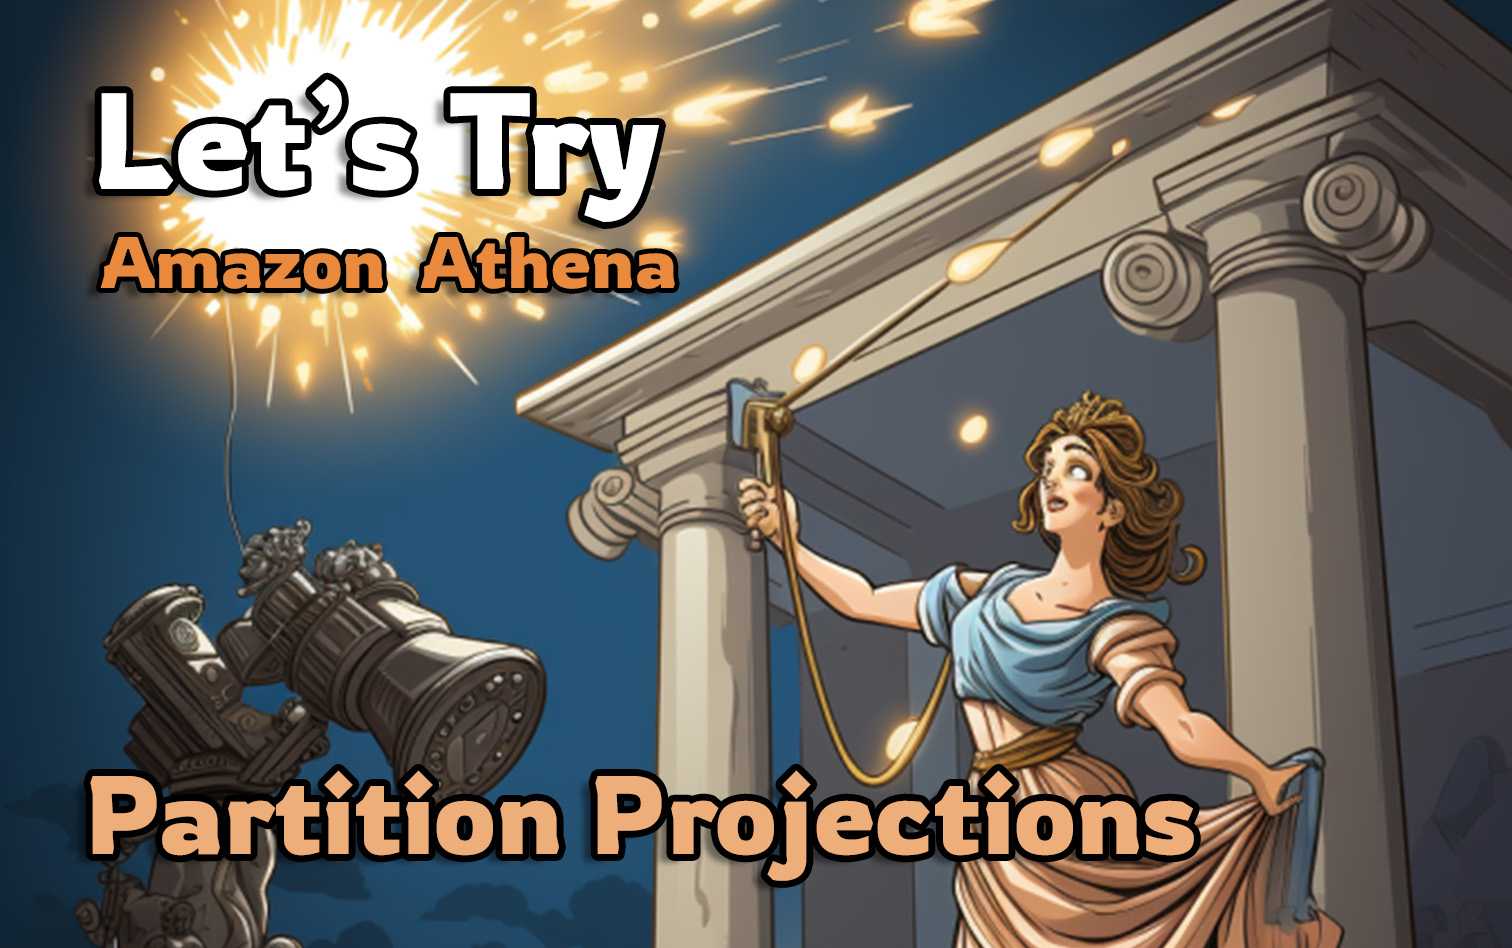 Let's Try - Amazon Athena Partition Projections